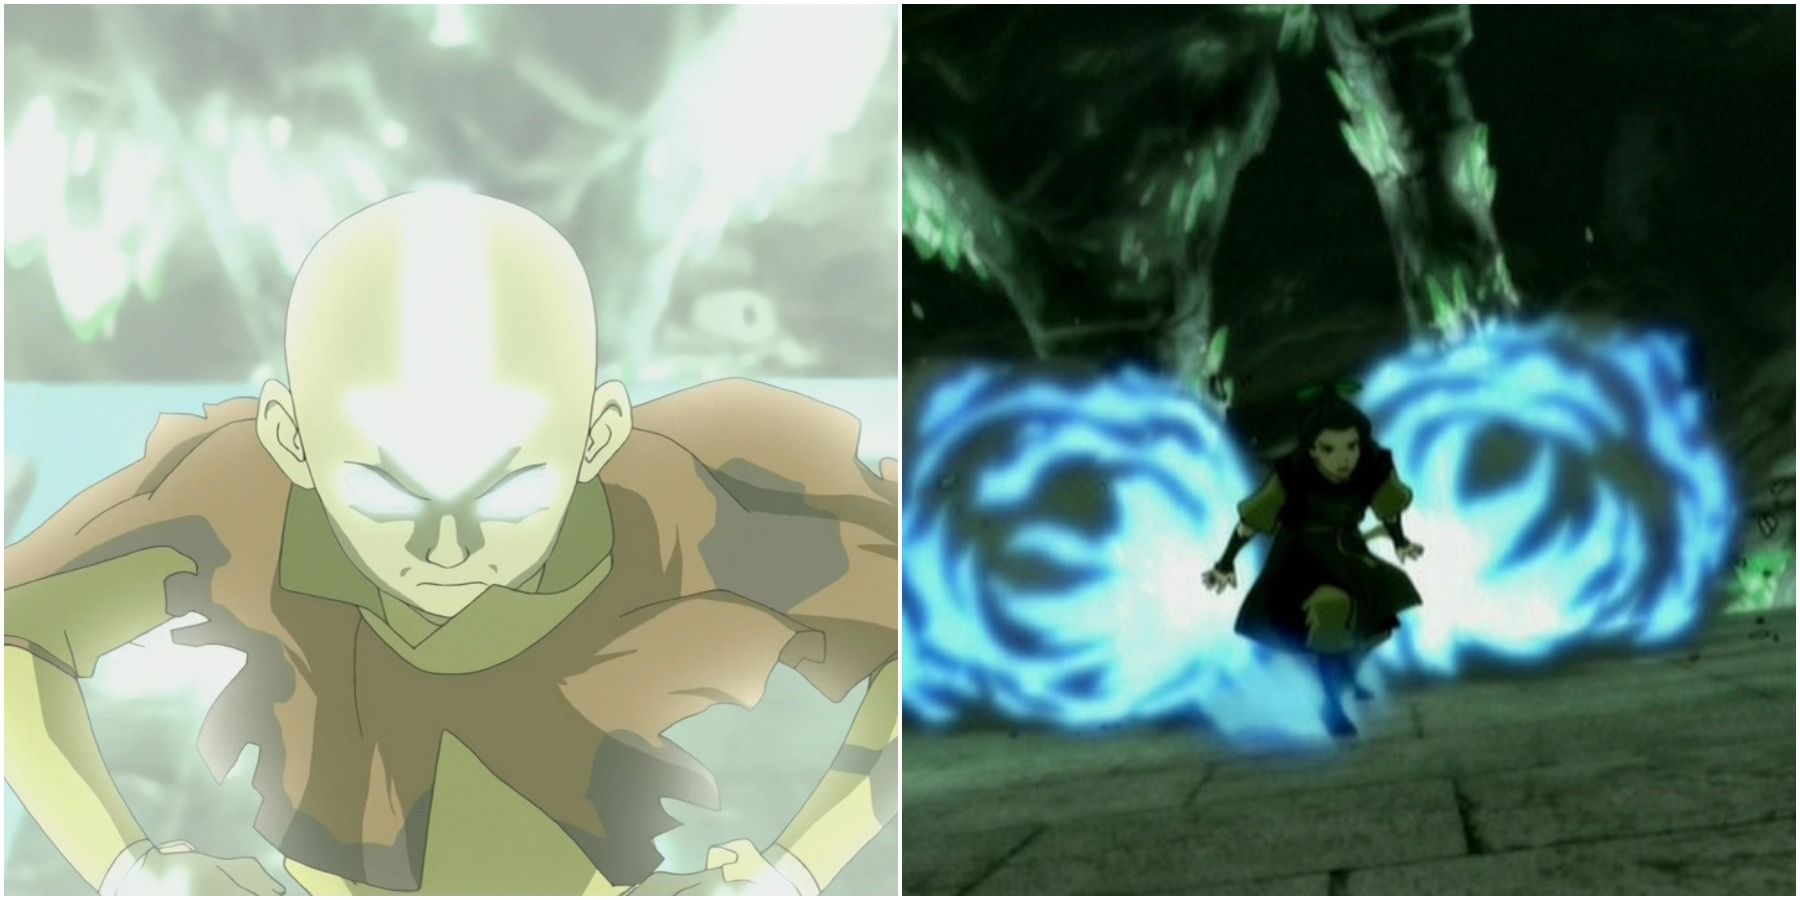 Aang In The Avatar State vs Azula in Avatar: The Last Airbender